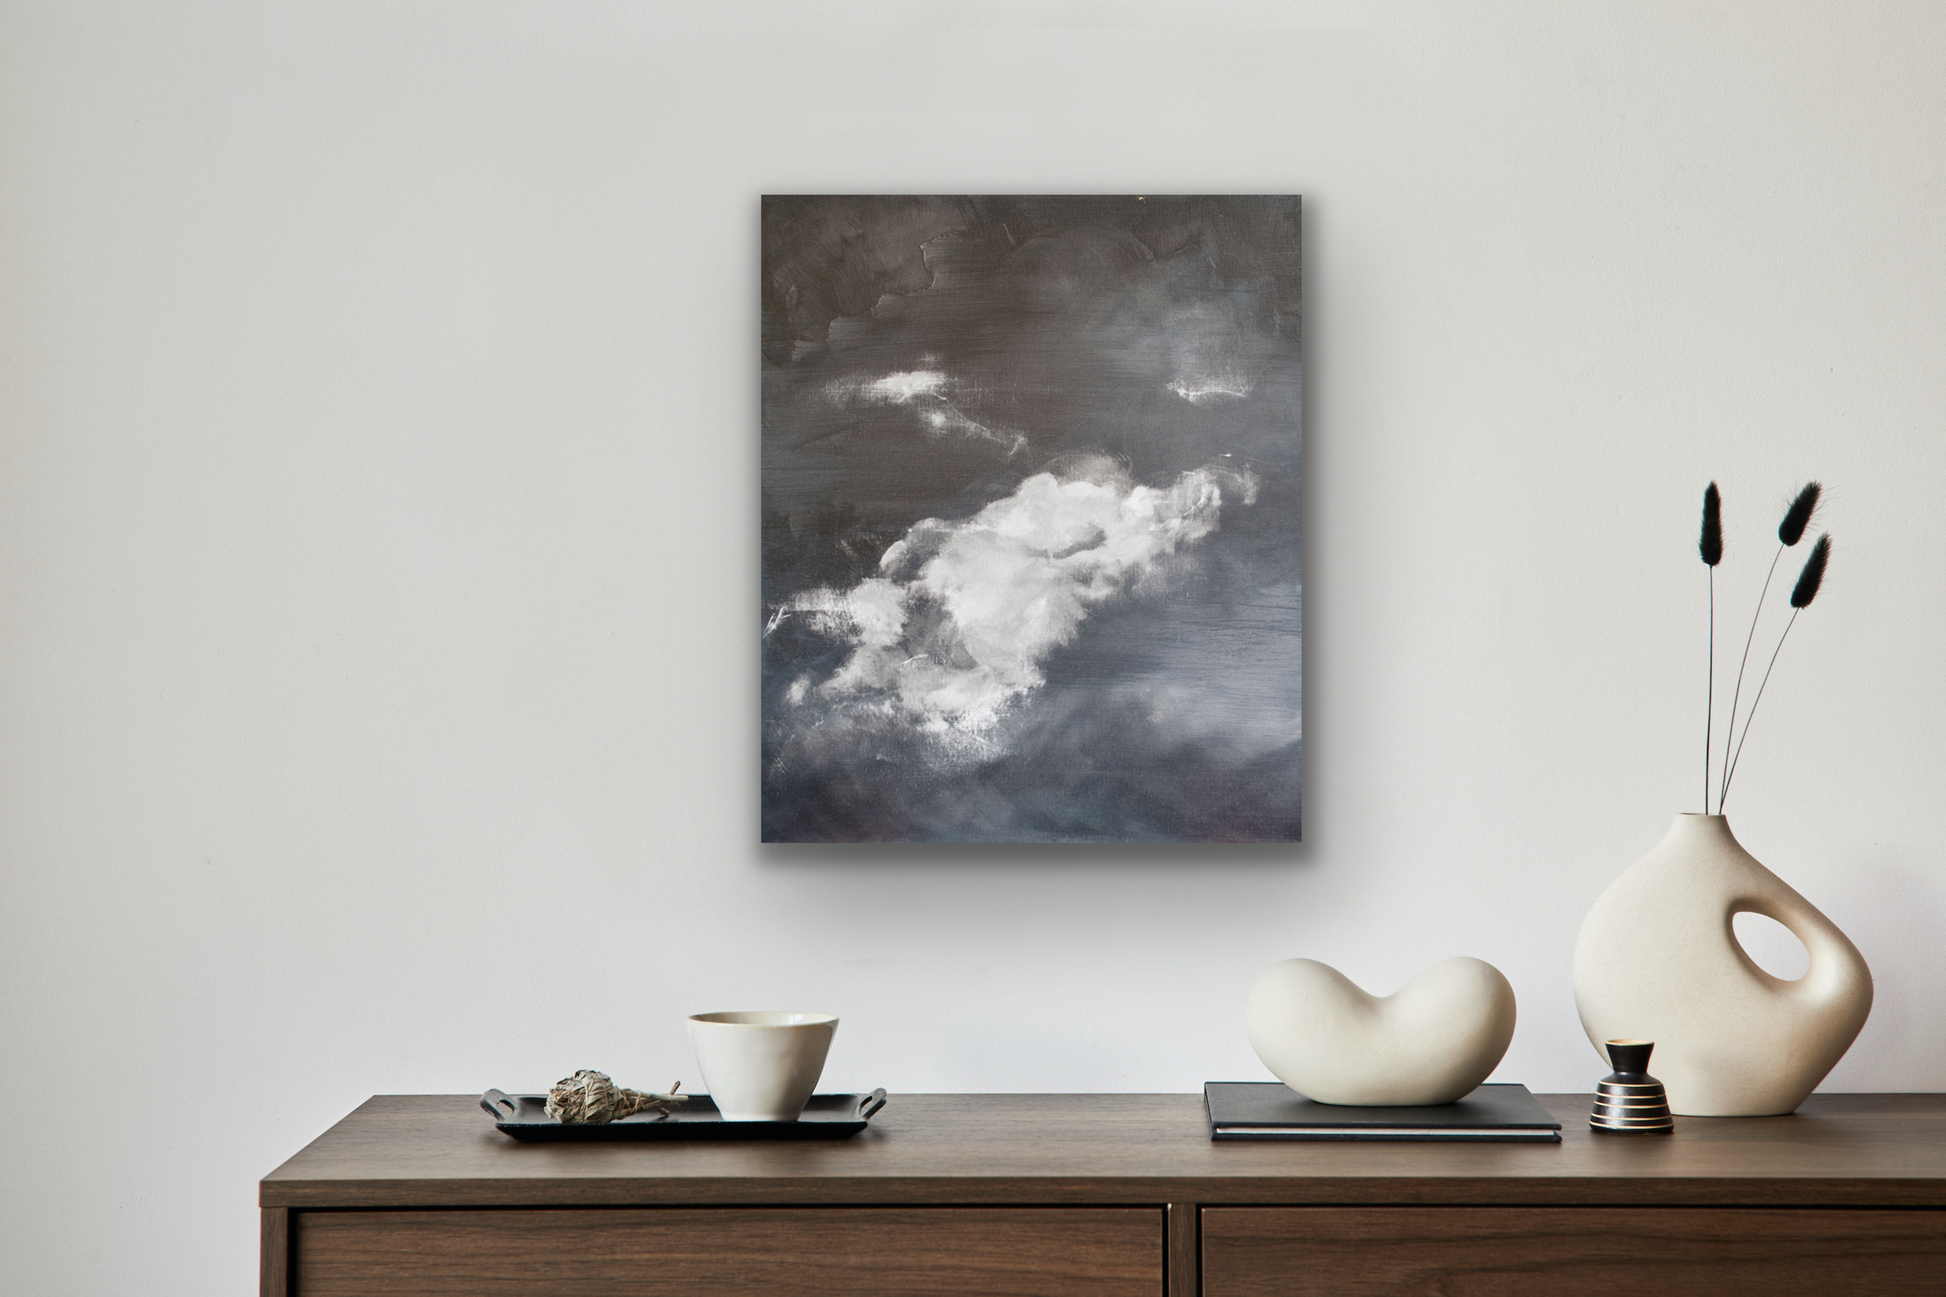 "Mono Cloud III" painting is black and white.